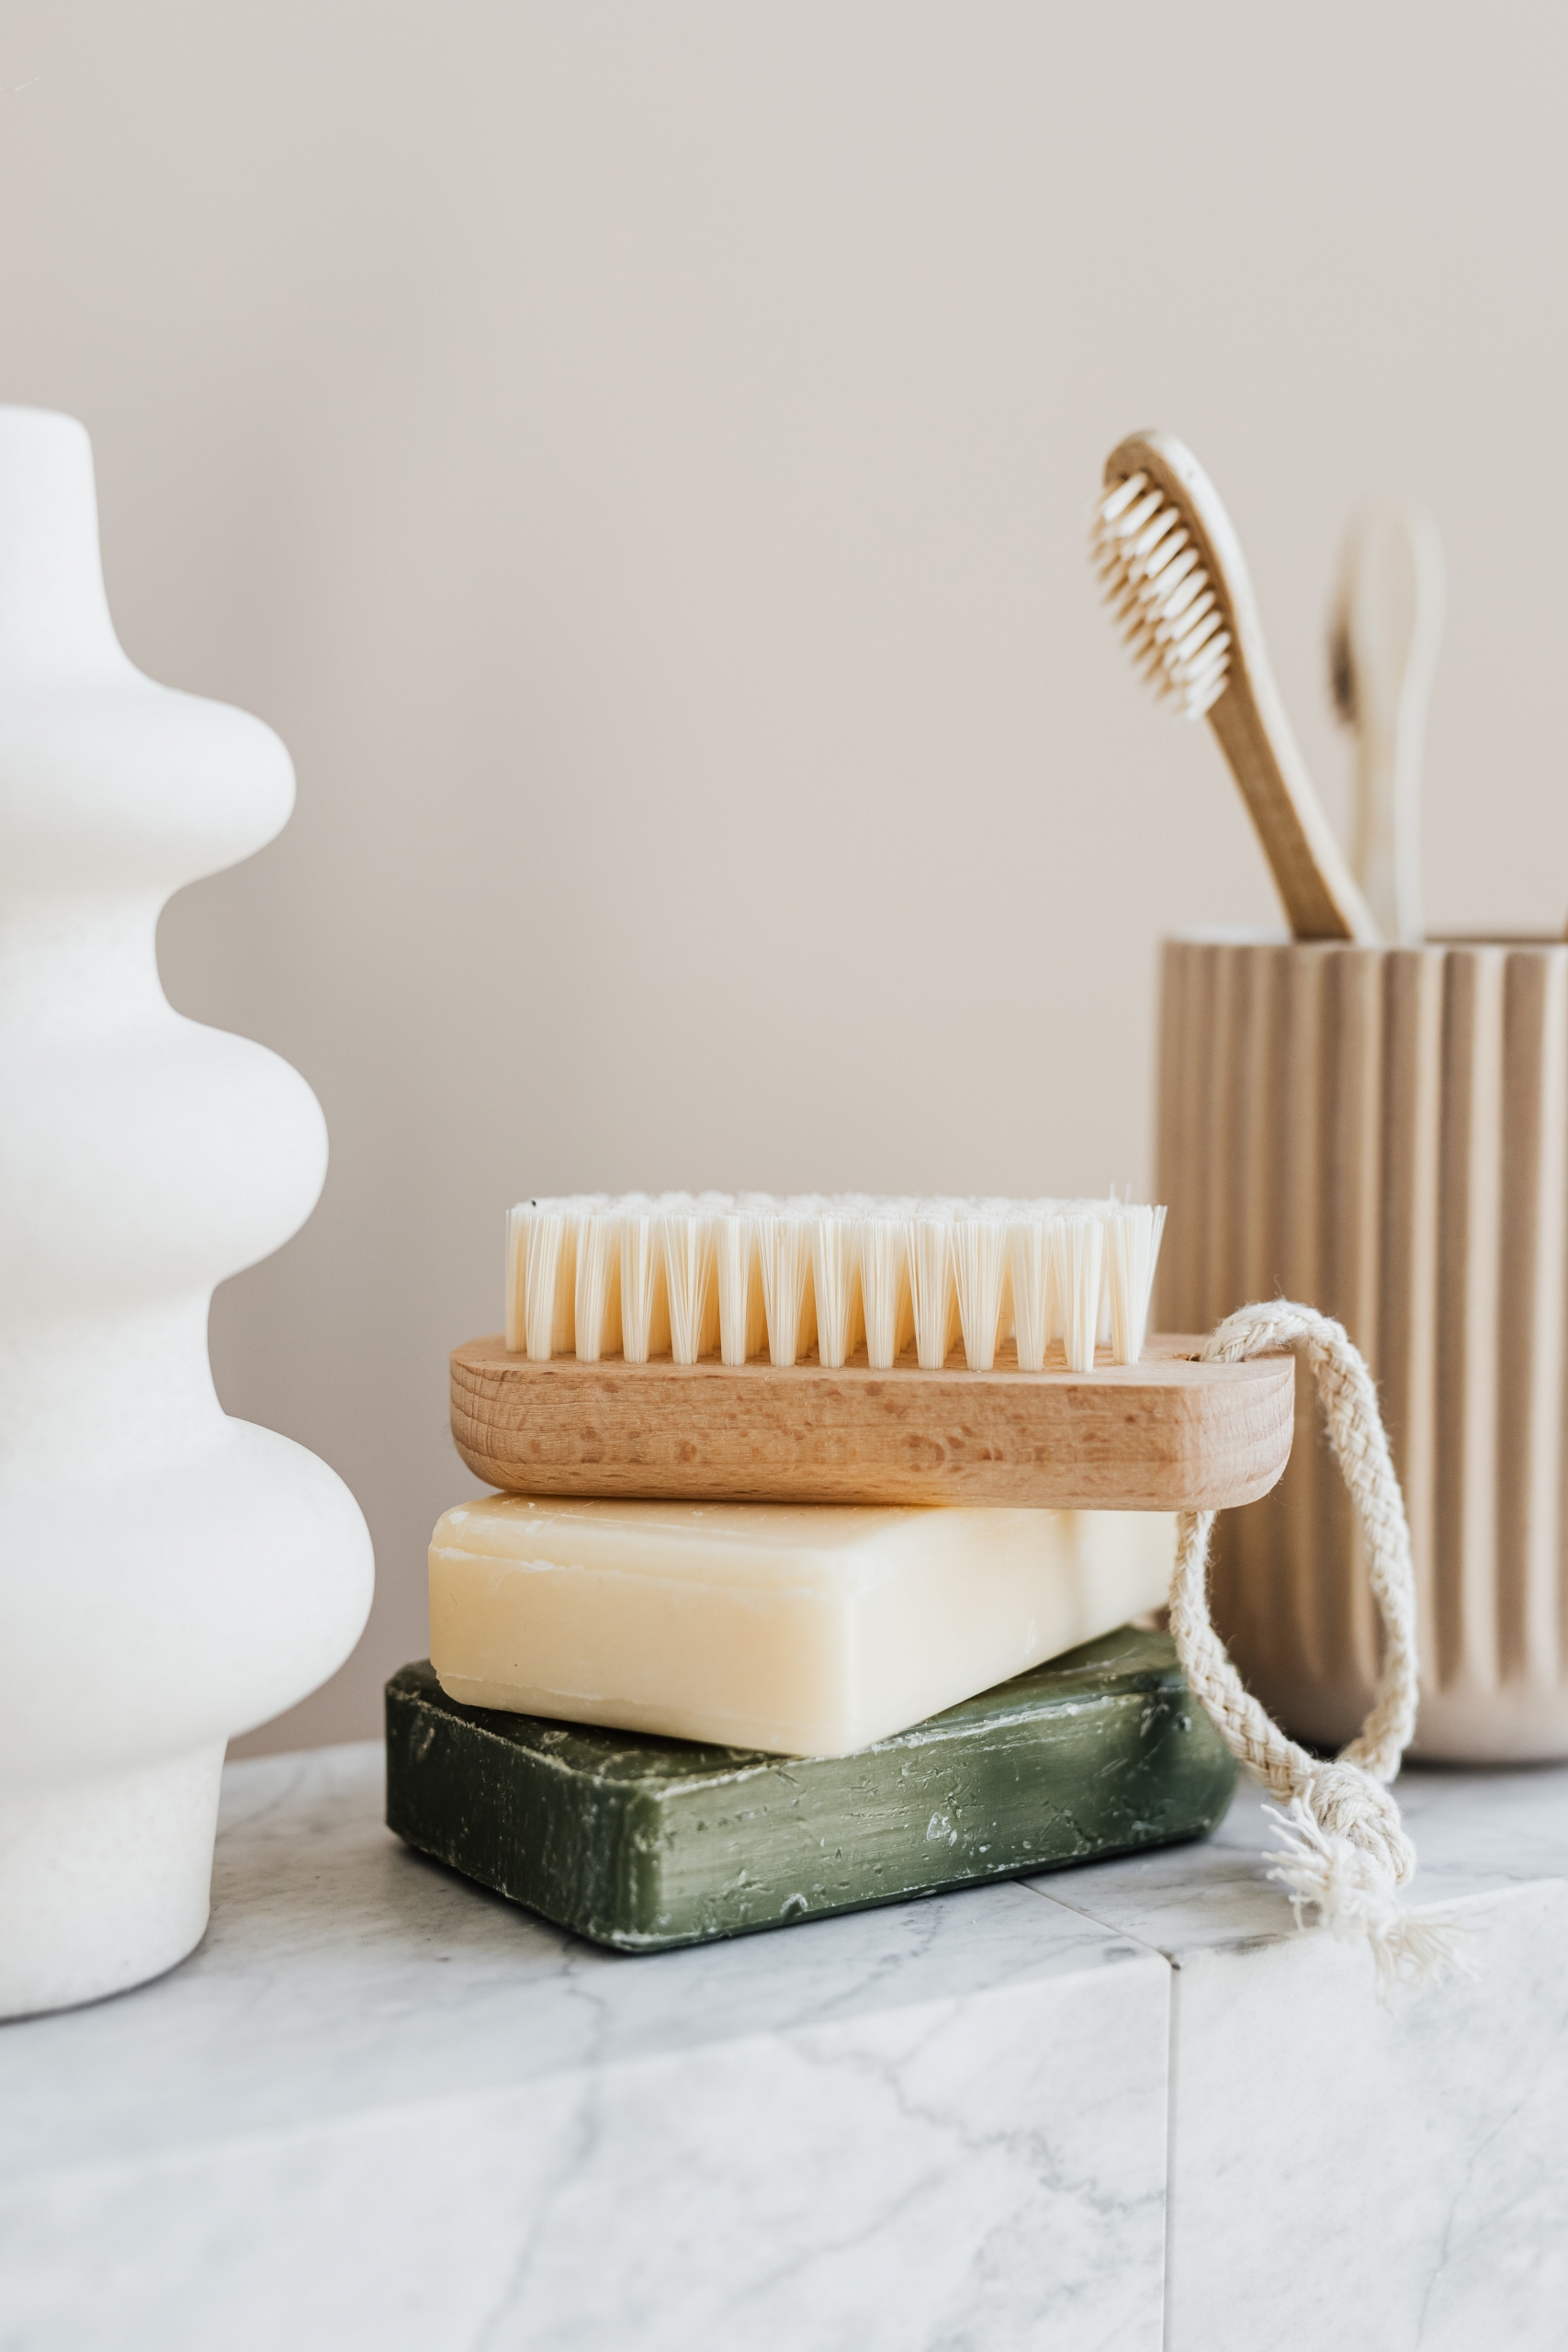 Dry body brushing – why should you do it and what to consider when buying a brush?